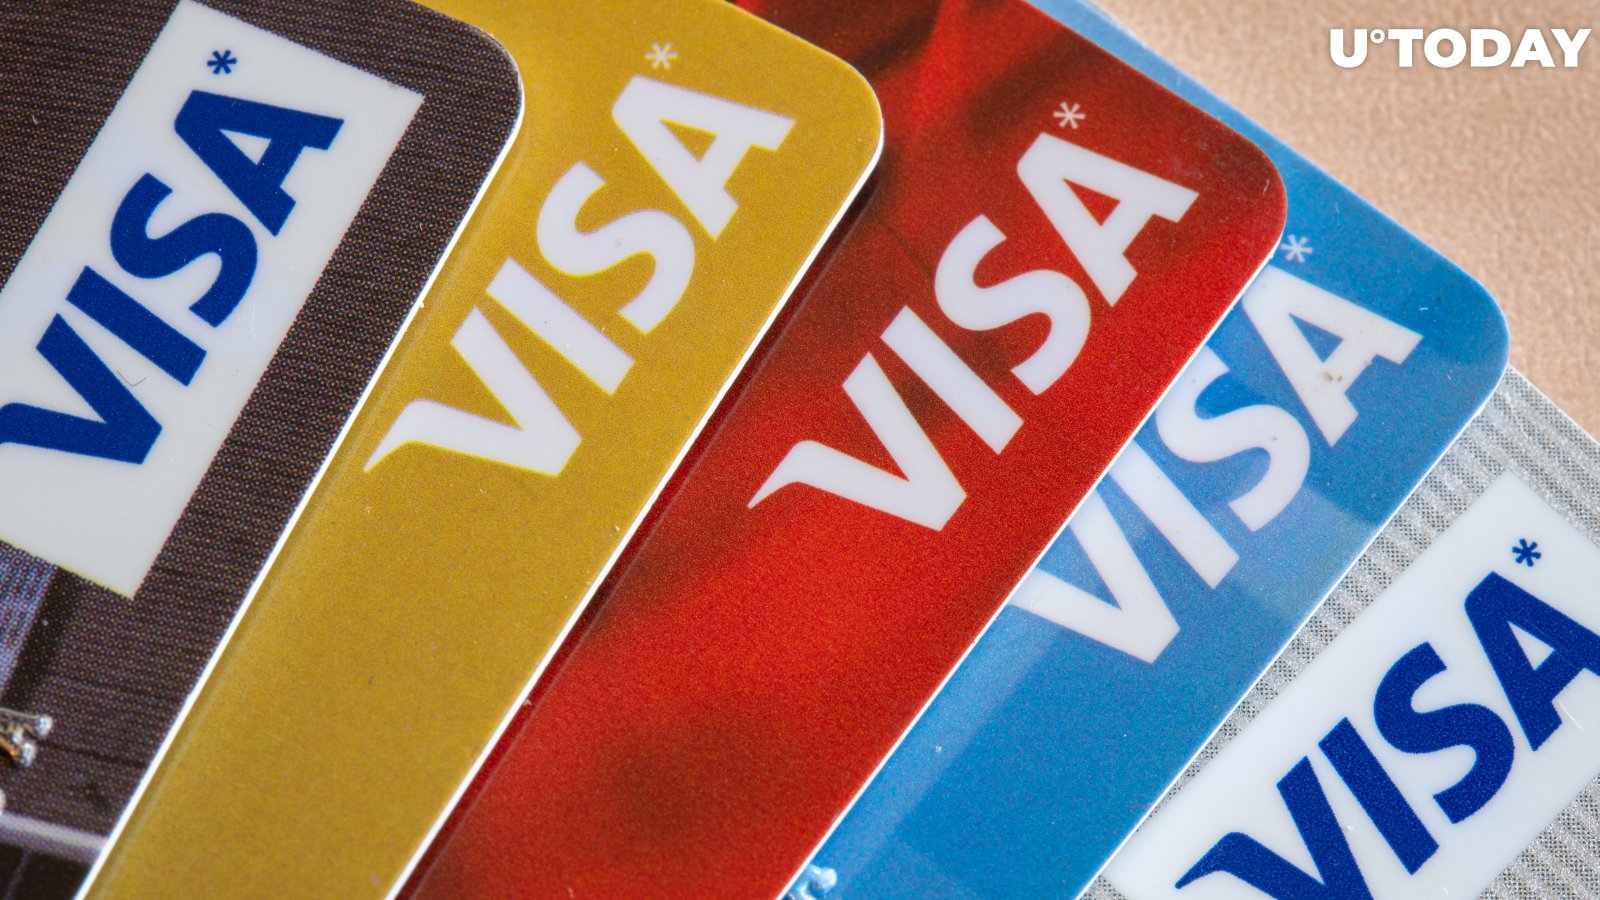 Visa Working on Groundbreaking Cryptocurrency Payment Technology